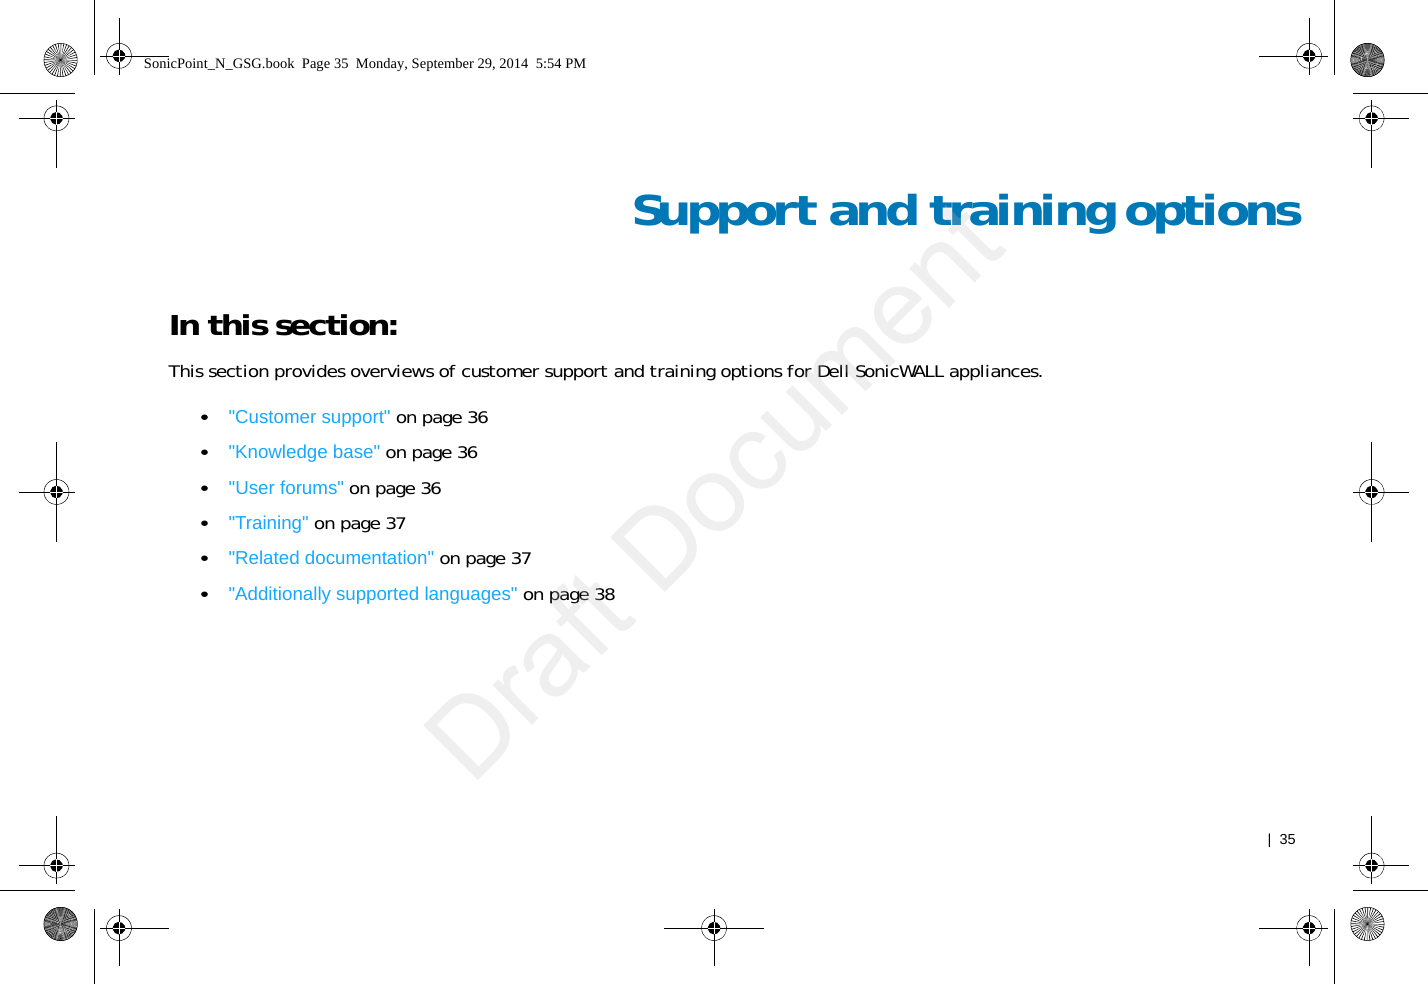   |  35Support and training optionsIn this section:This section provides overviews of customer support and training options for Dell SonicWALL appliances.•&quot;Customer support&quot; on page 36•&quot;Knowledge base&quot; on page 36•&quot;User forums&quot; on page 36•&quot;Training&quot; on page 37•&quot;Related documentation&quot; on page 37•&quot;Additionally supported languages&quot; on page 38SonicPoint_N_GSG.book  Page 35  Monday, September 29, 2014  5:54 PMDraft Document